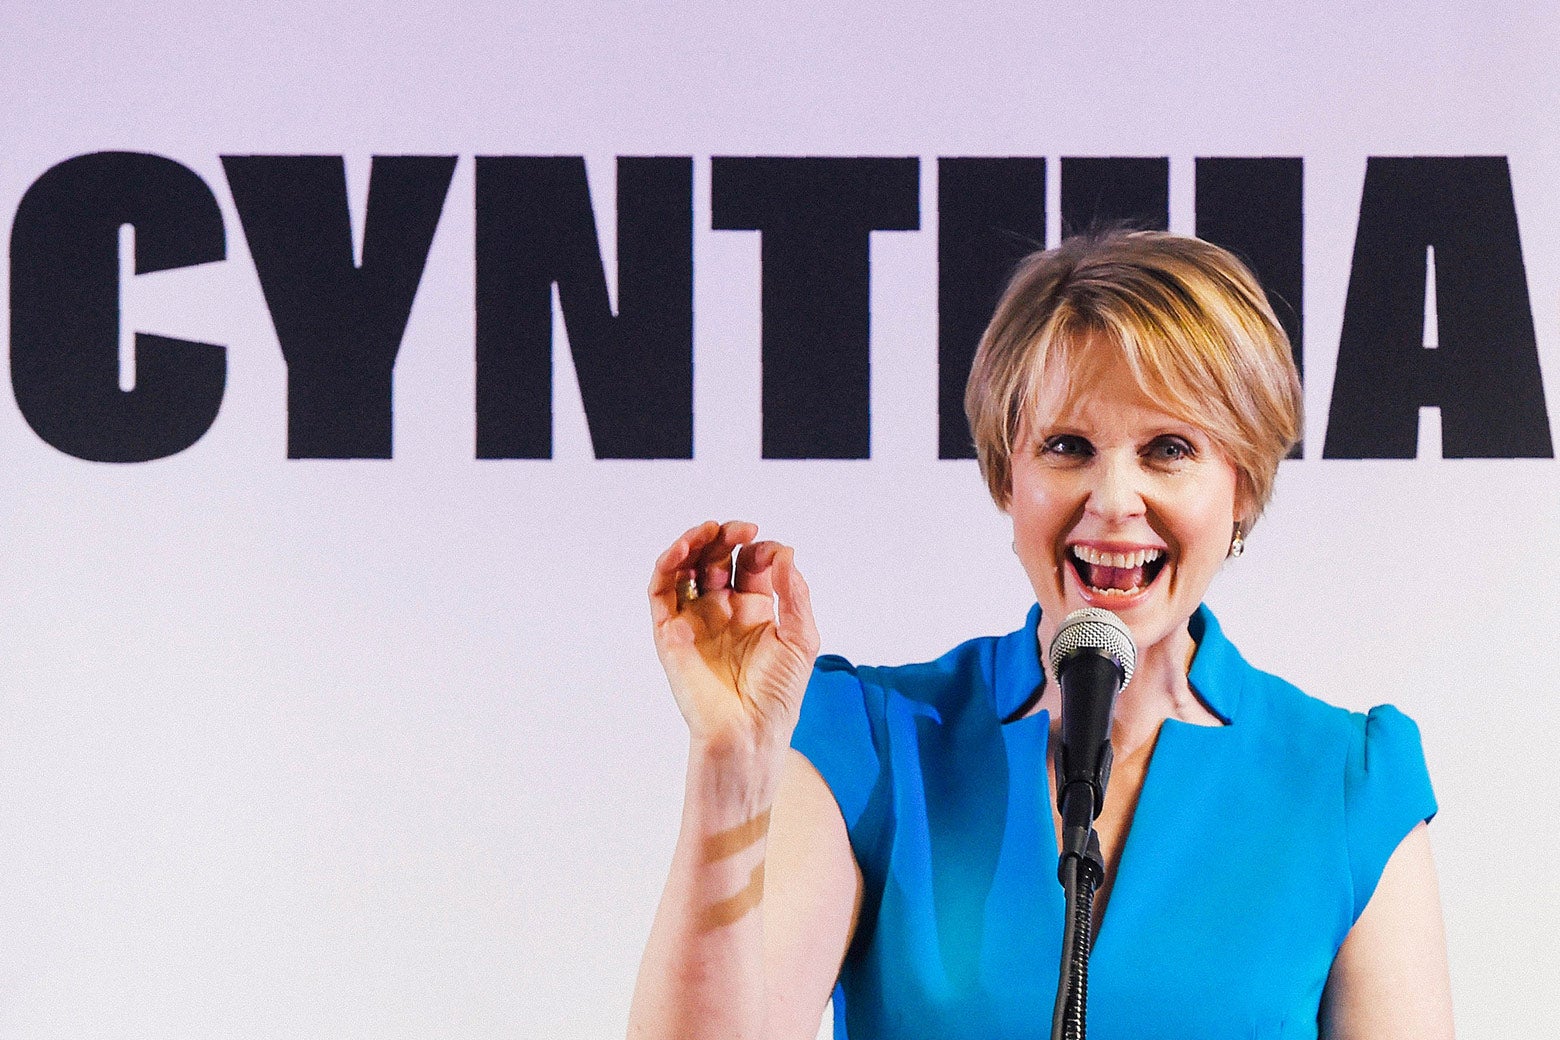 Cynthia Nixon standing in front of a campaign sign that says Cynthia.